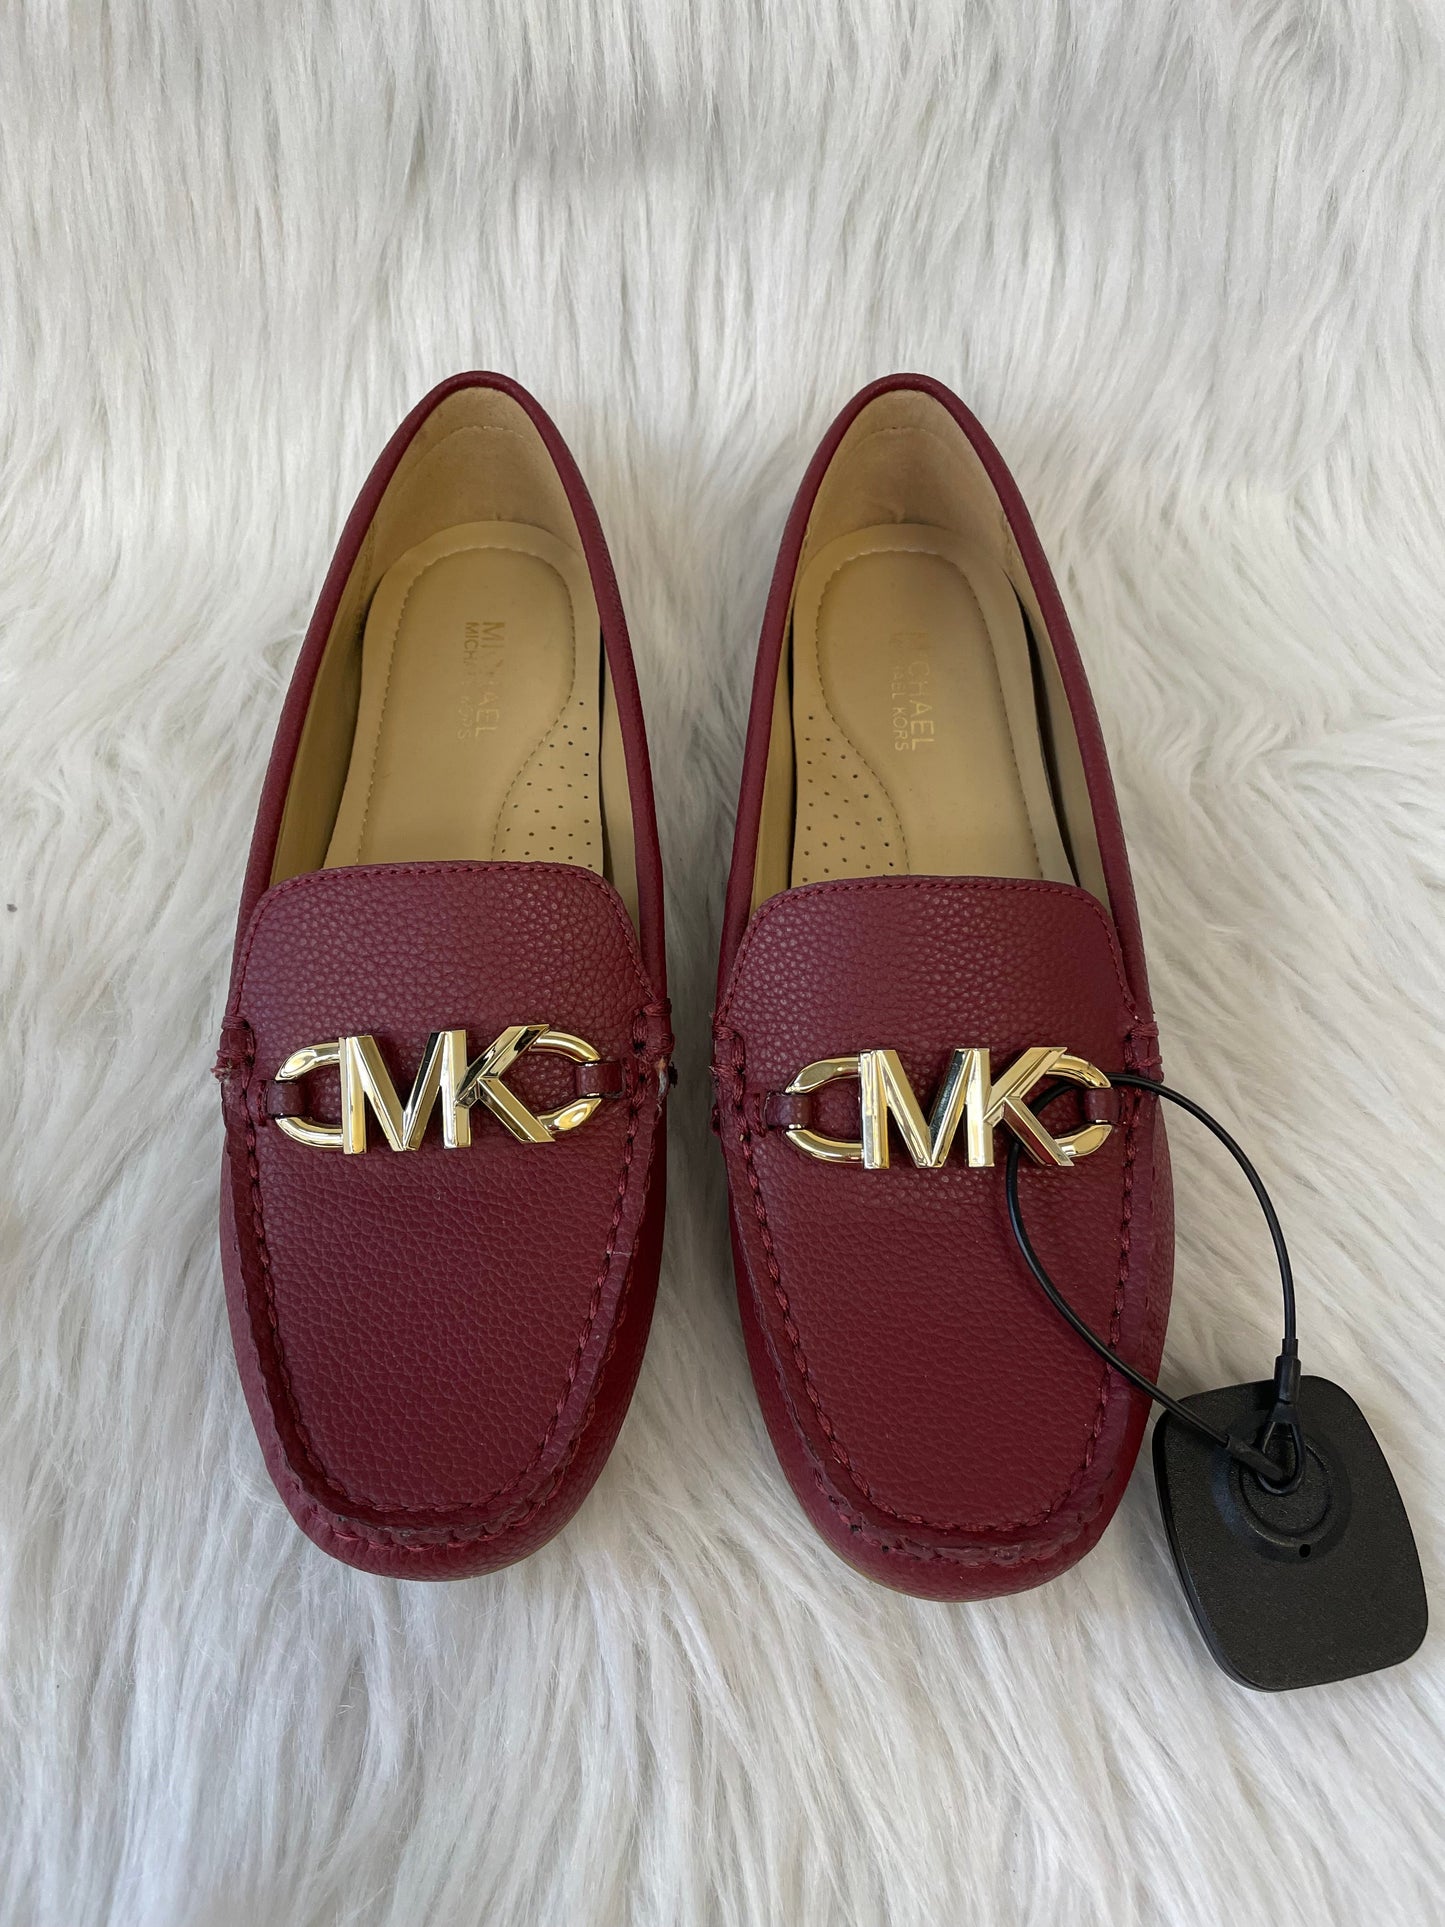 Shoes Flats Loafer Oxford By Michael By Michael Kors  Size: 6